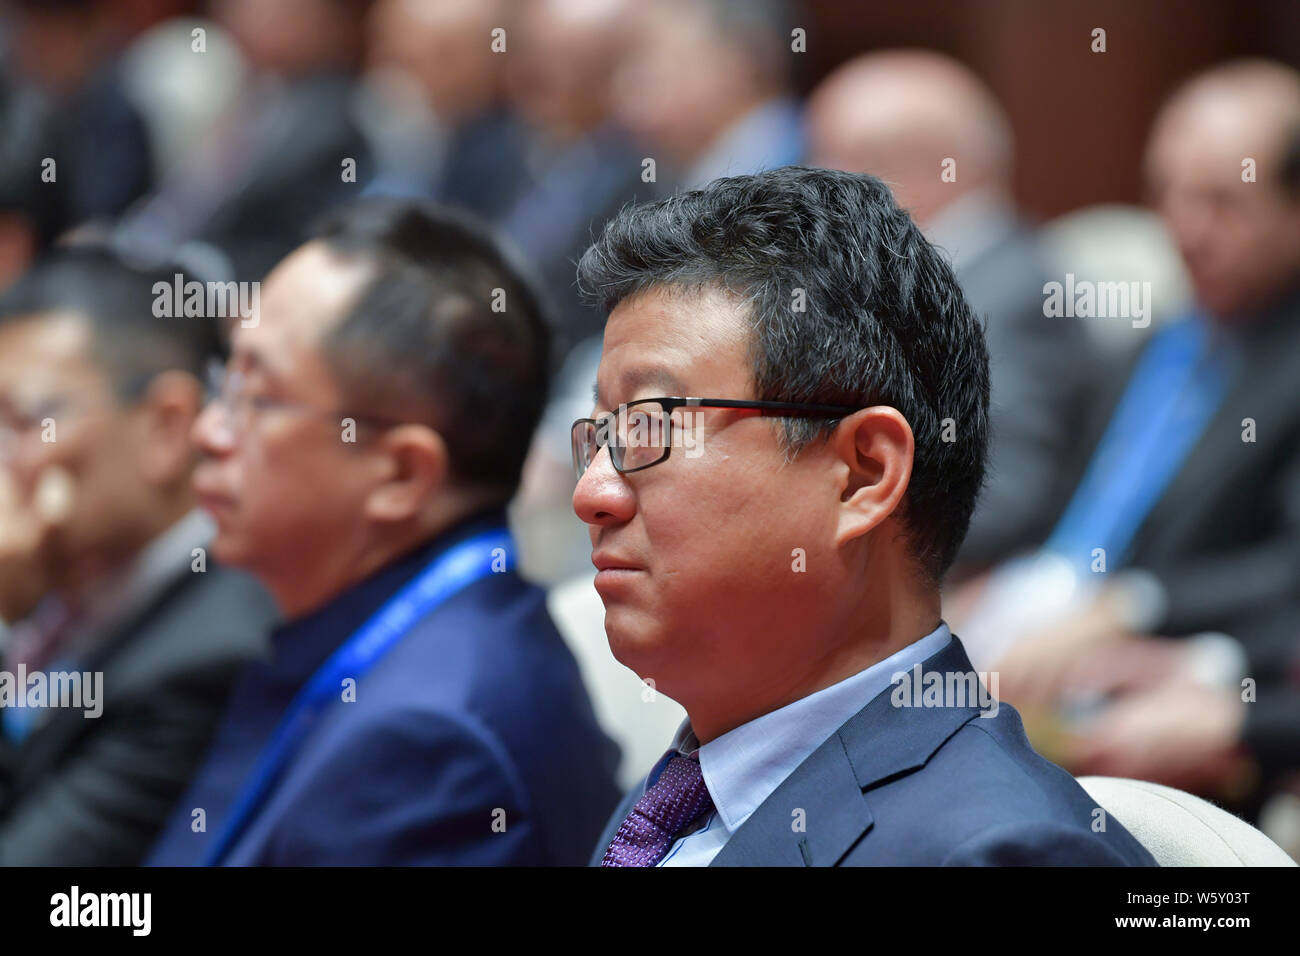 William Ding or Ding Lei, CEO of Netease (163.com), attends the opening ceremony for the 5th World Internet Conference (WIC), also known as Wuzhen Sum Stock Photo